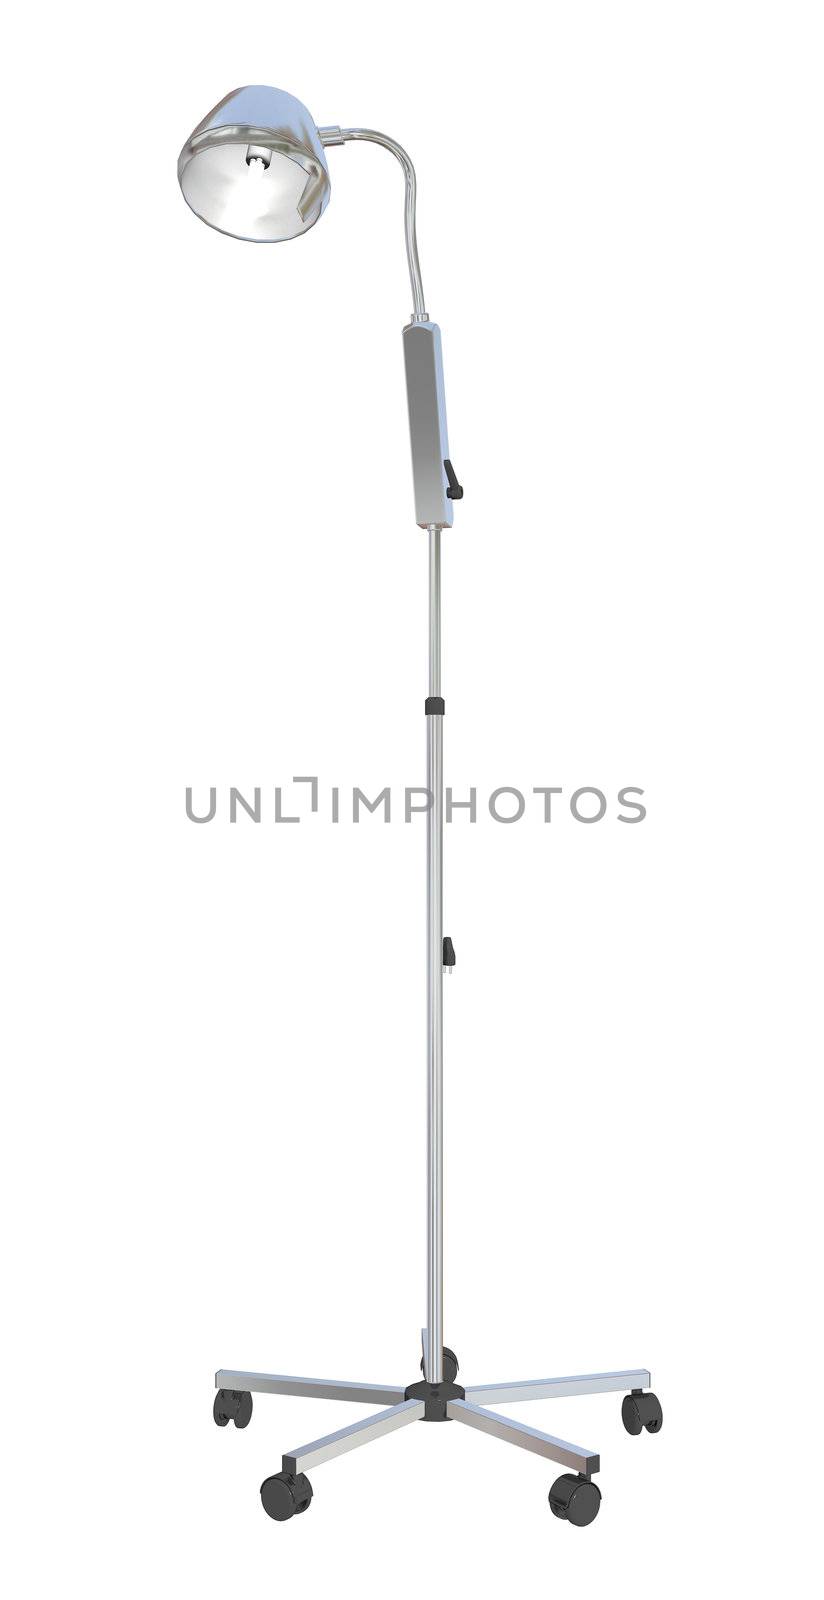 Adjustable metal mobile medical stand lamp, 3d illustration, isolated against a white background